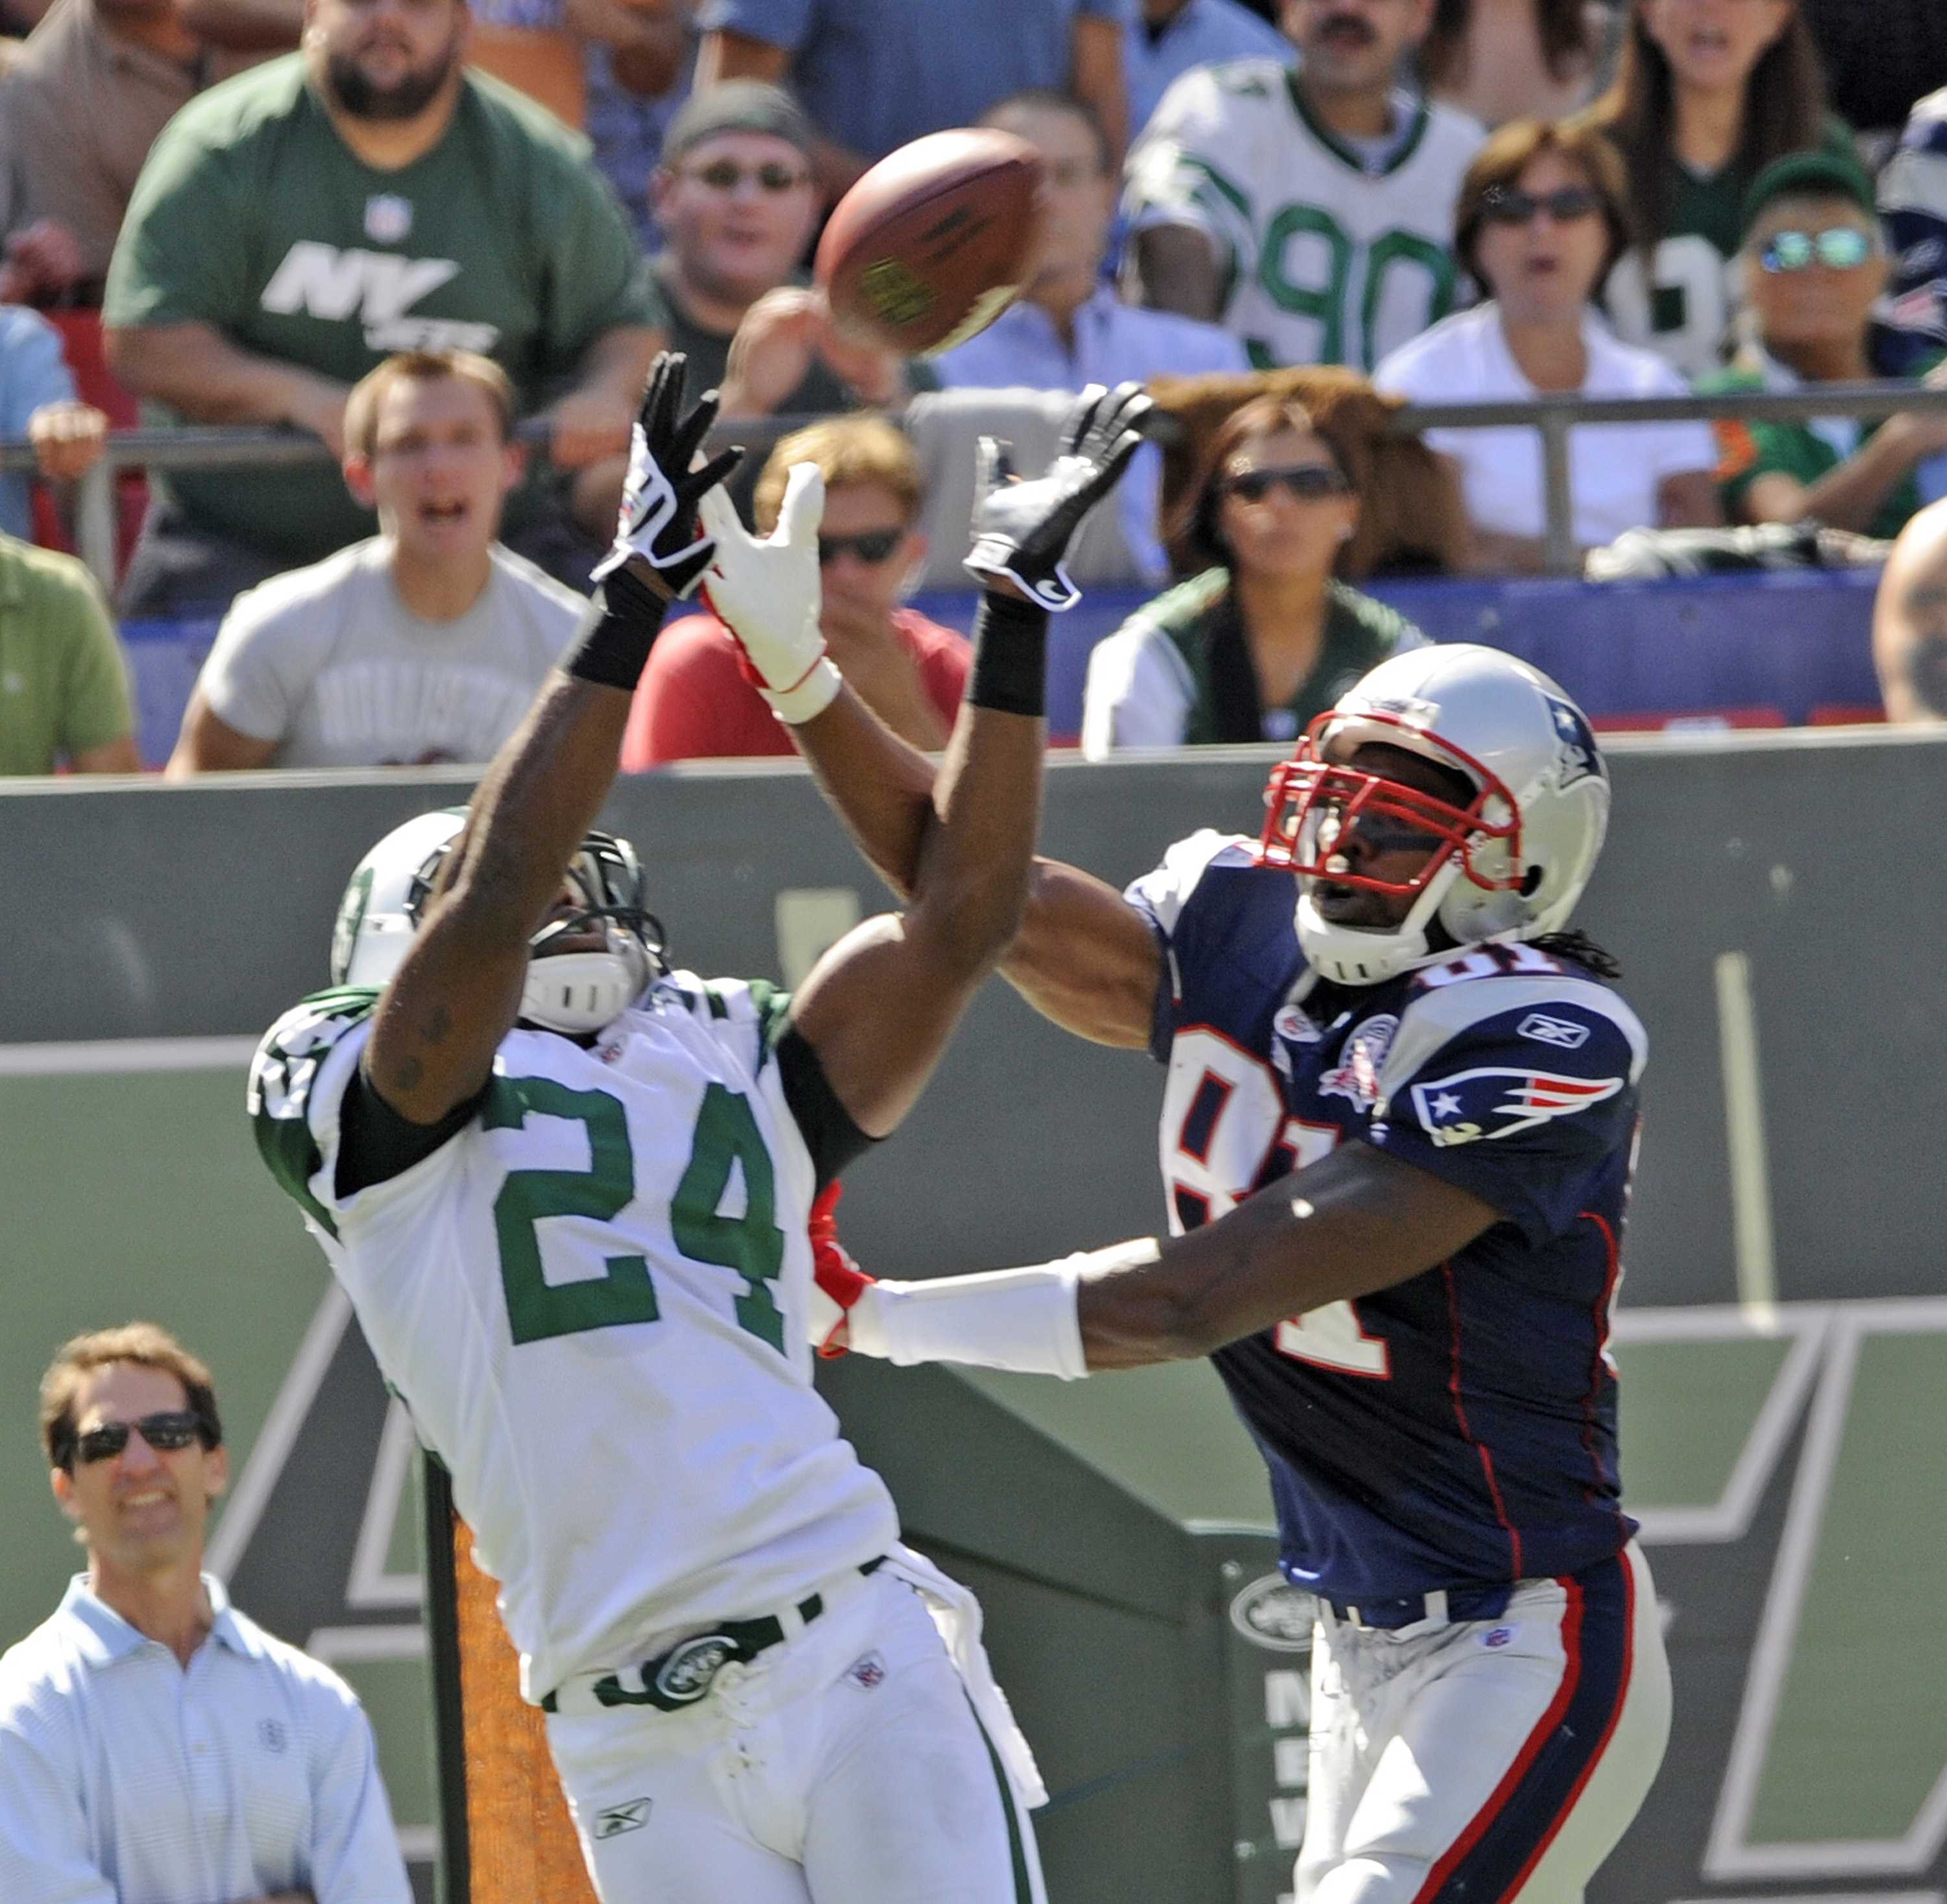 New York Jets' Darrelle Revis intercepts a pass intended for New England Patriots' Randy Moss in the end zone at Giants Stadium in East Rutherford, New Jersey, Sunday, September 20, 2009. The Jets won 16-9. (David Pokress/Newsday/MCT)